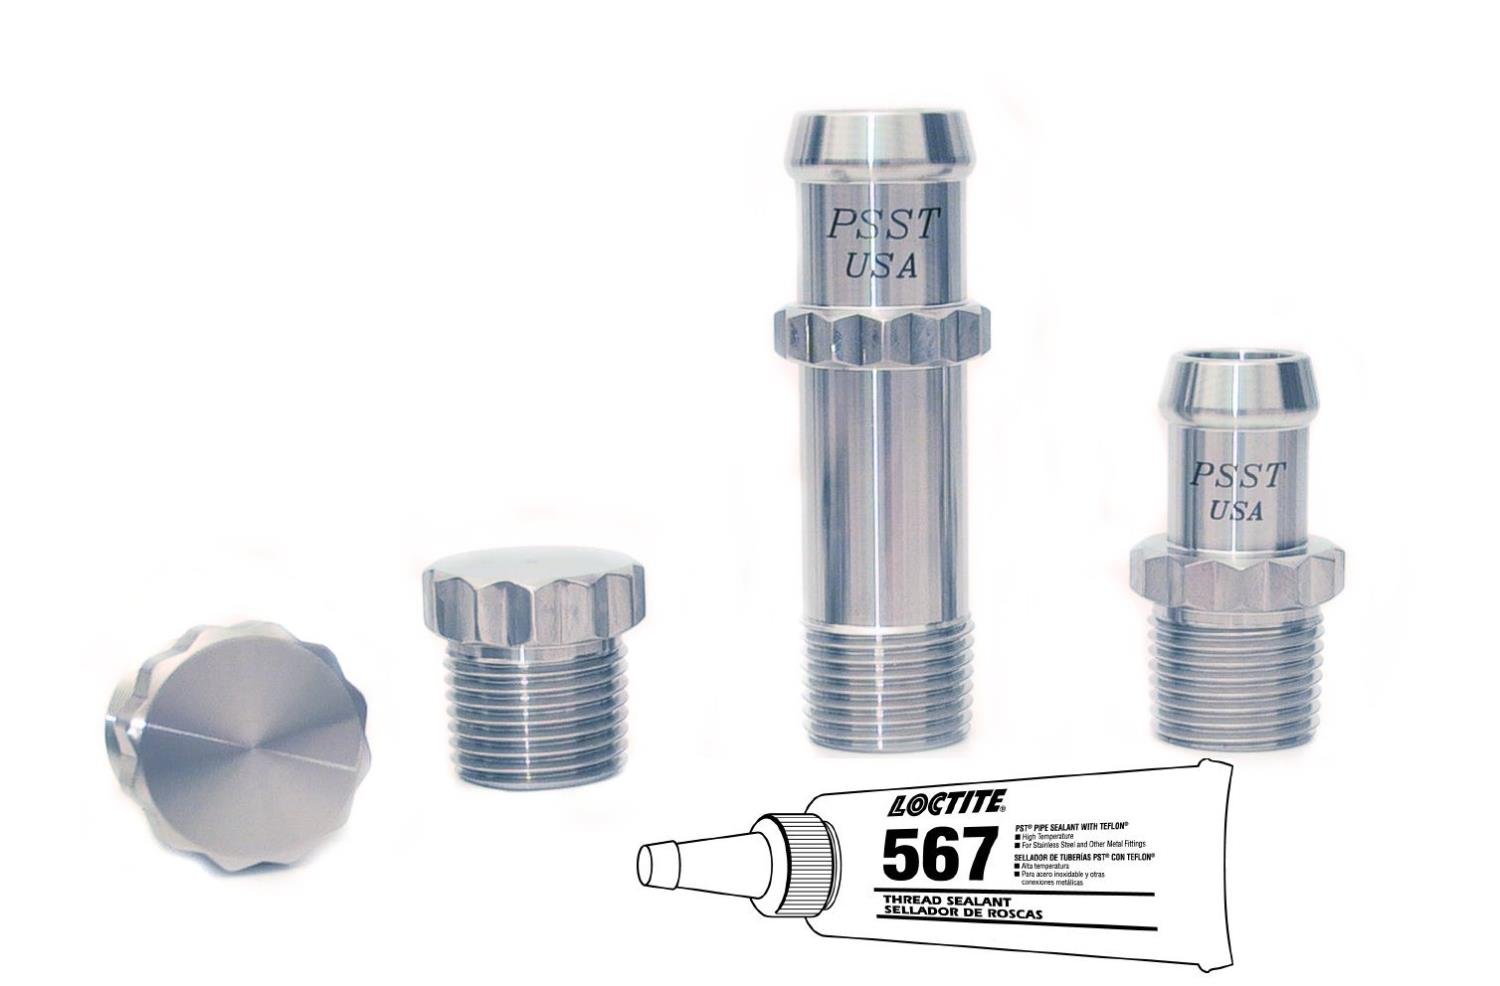 Koolkitz Fitting Kit Includes: (1) 1/2 in. NPT x 5/8 in. Barb, (1) 1/2 in. NPT x 3/4 in. Barb, (2) 1/2 in. NPT Plugs [Polished]